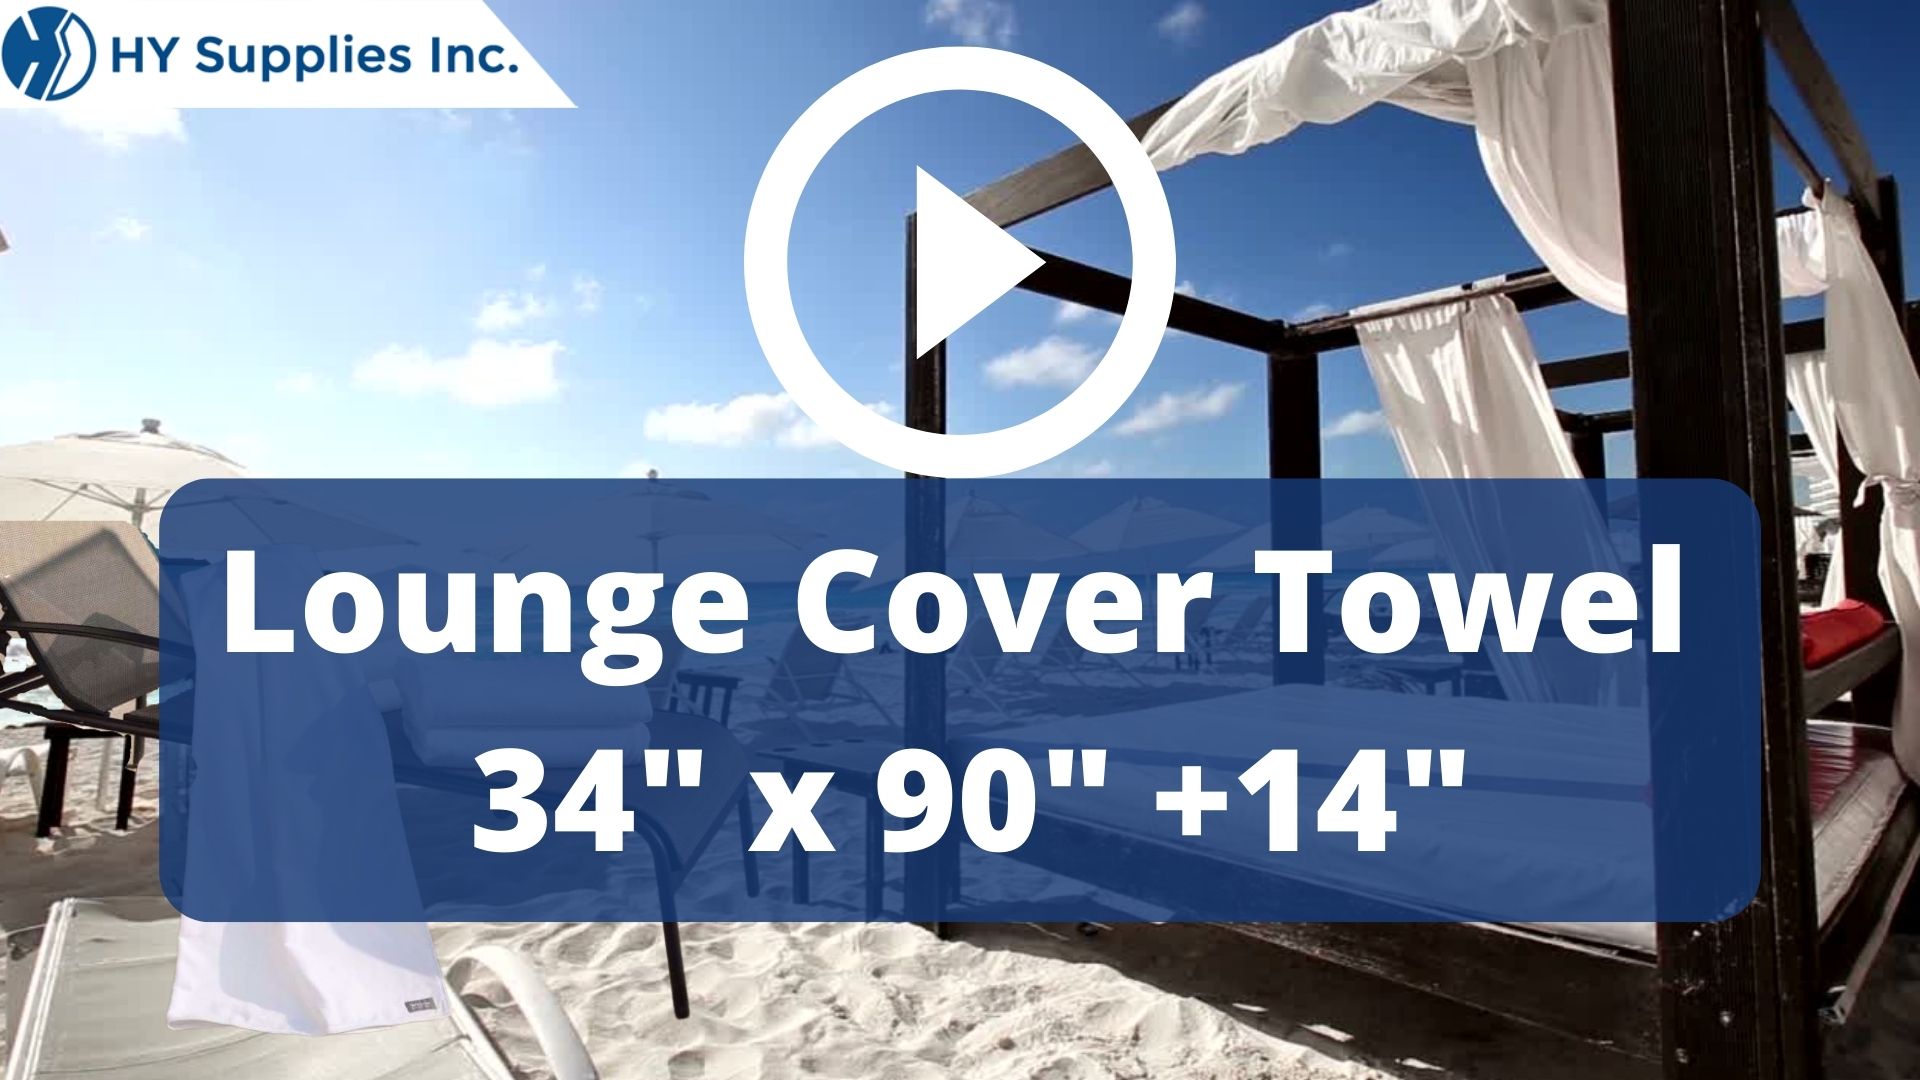 Lounge Cover Towel - 34" x 90" +14"